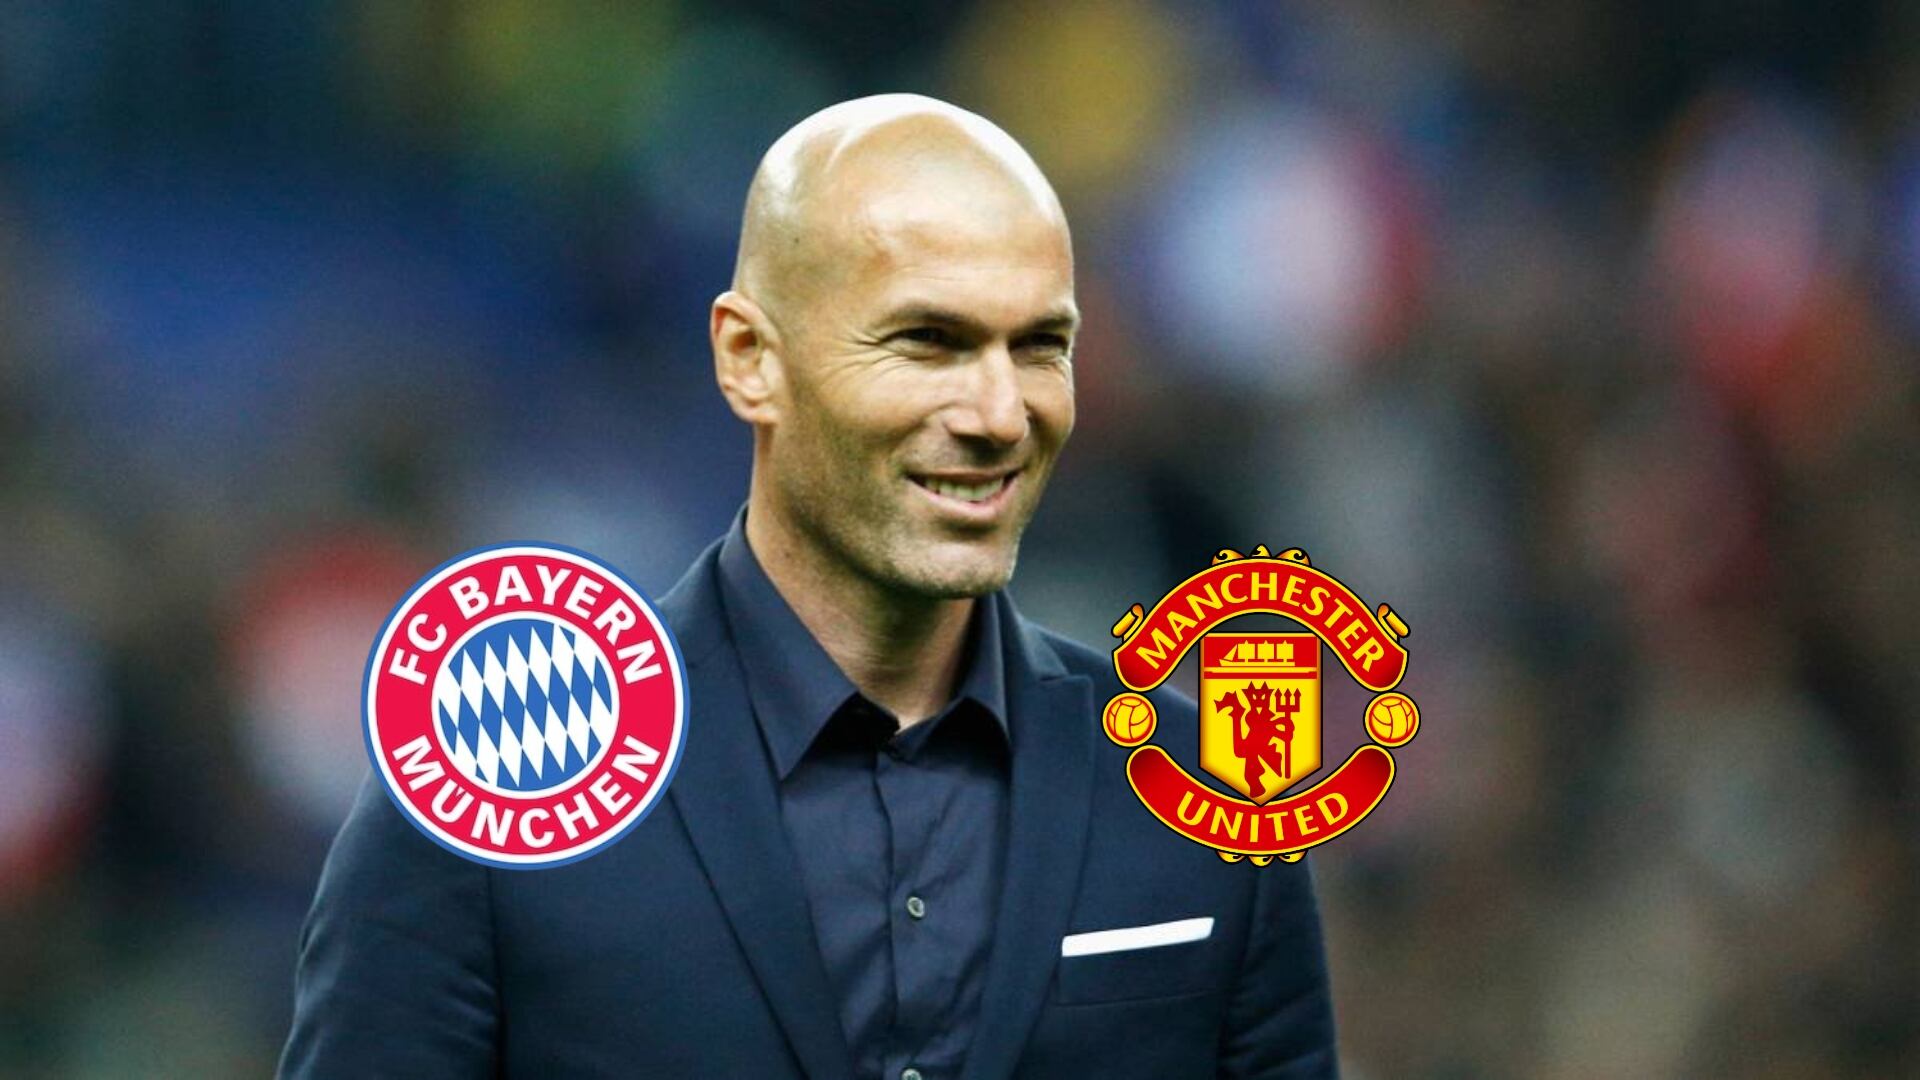 (VIDEO) Better than some current players, how Zidane enjoys playing at 51 while deciding between Bayern or Man United